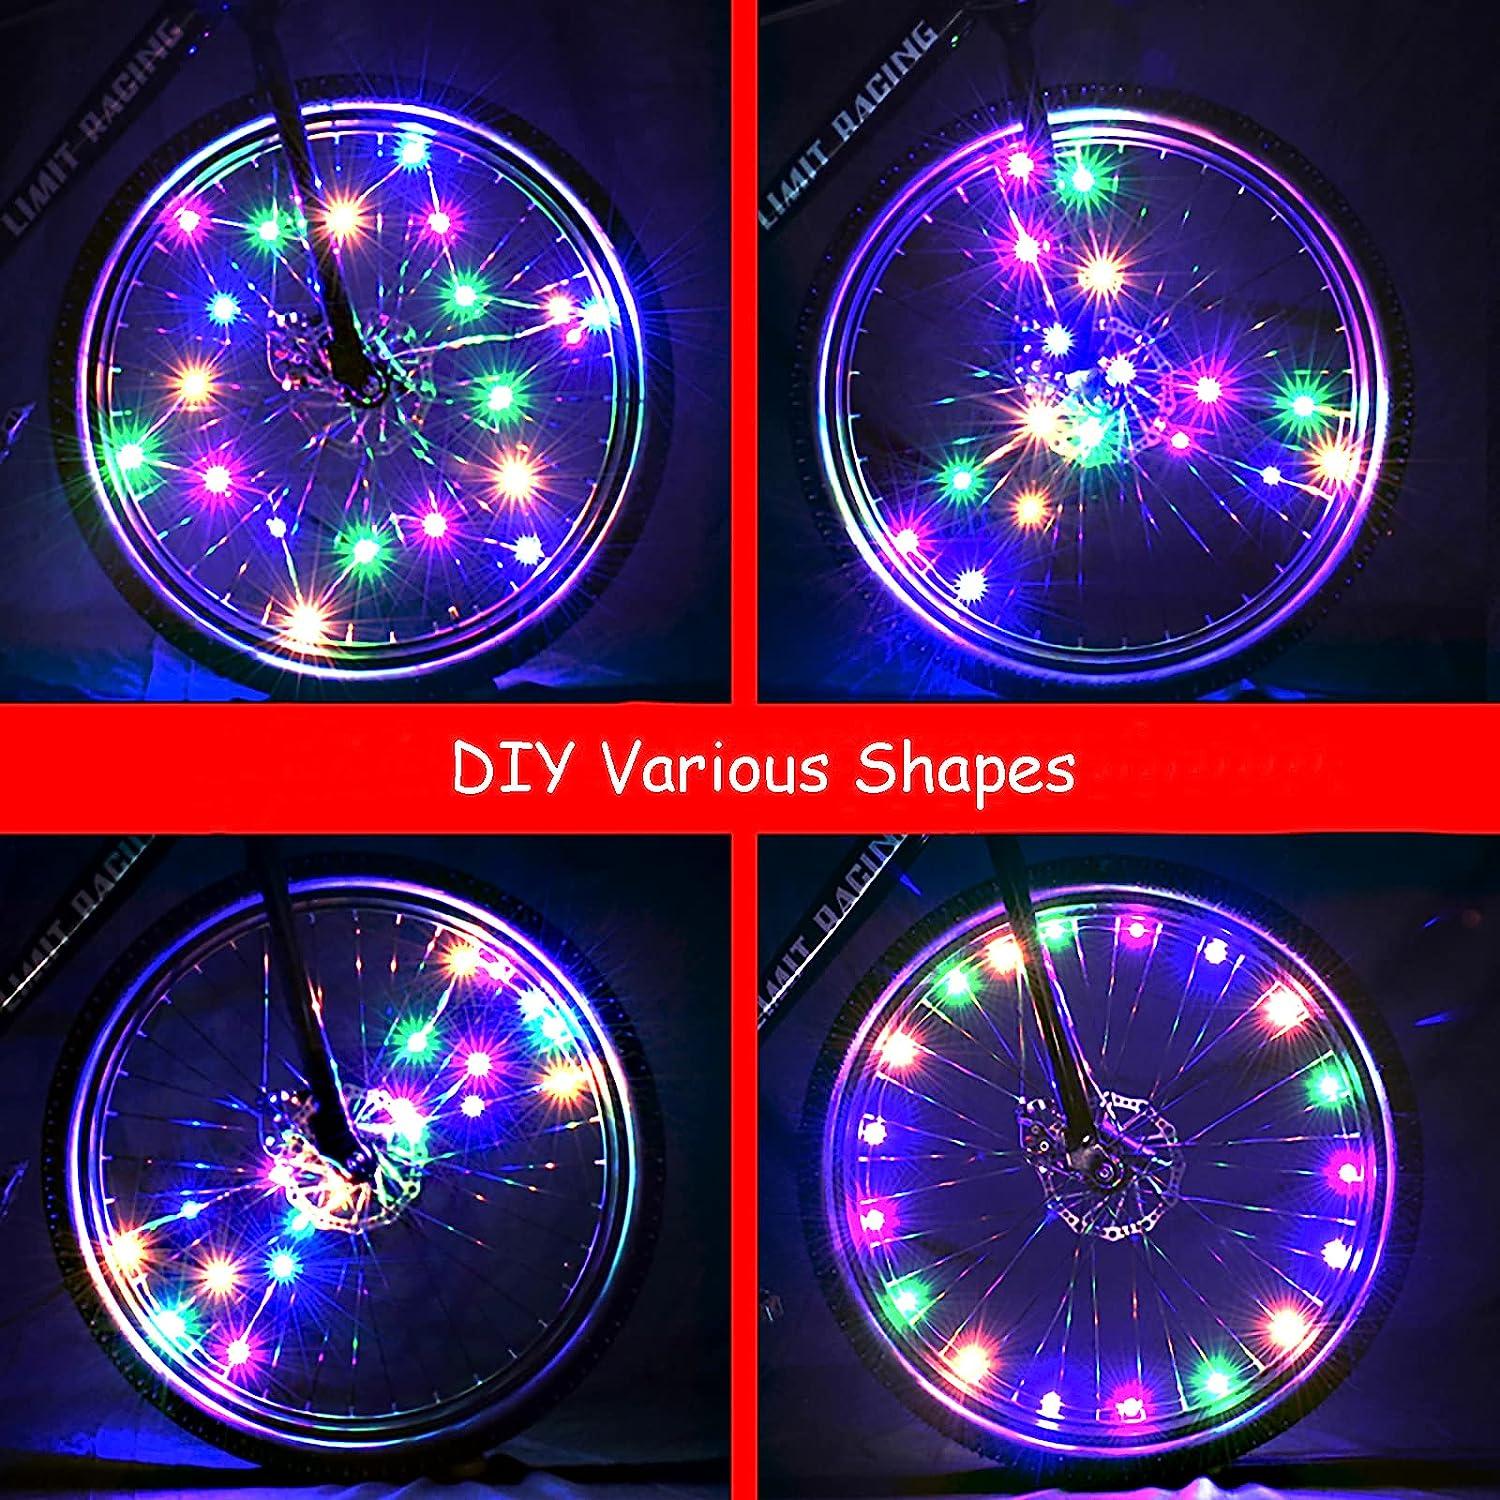 Coohchch 2 Tire Pack Bike Lights LED Bicycle Wheel Light Decoration Accessories 2023 Newest Wire Rope Light Waterproof for Ultimate Safety Spoke Lights for Kid,Teens,Adults Coloful